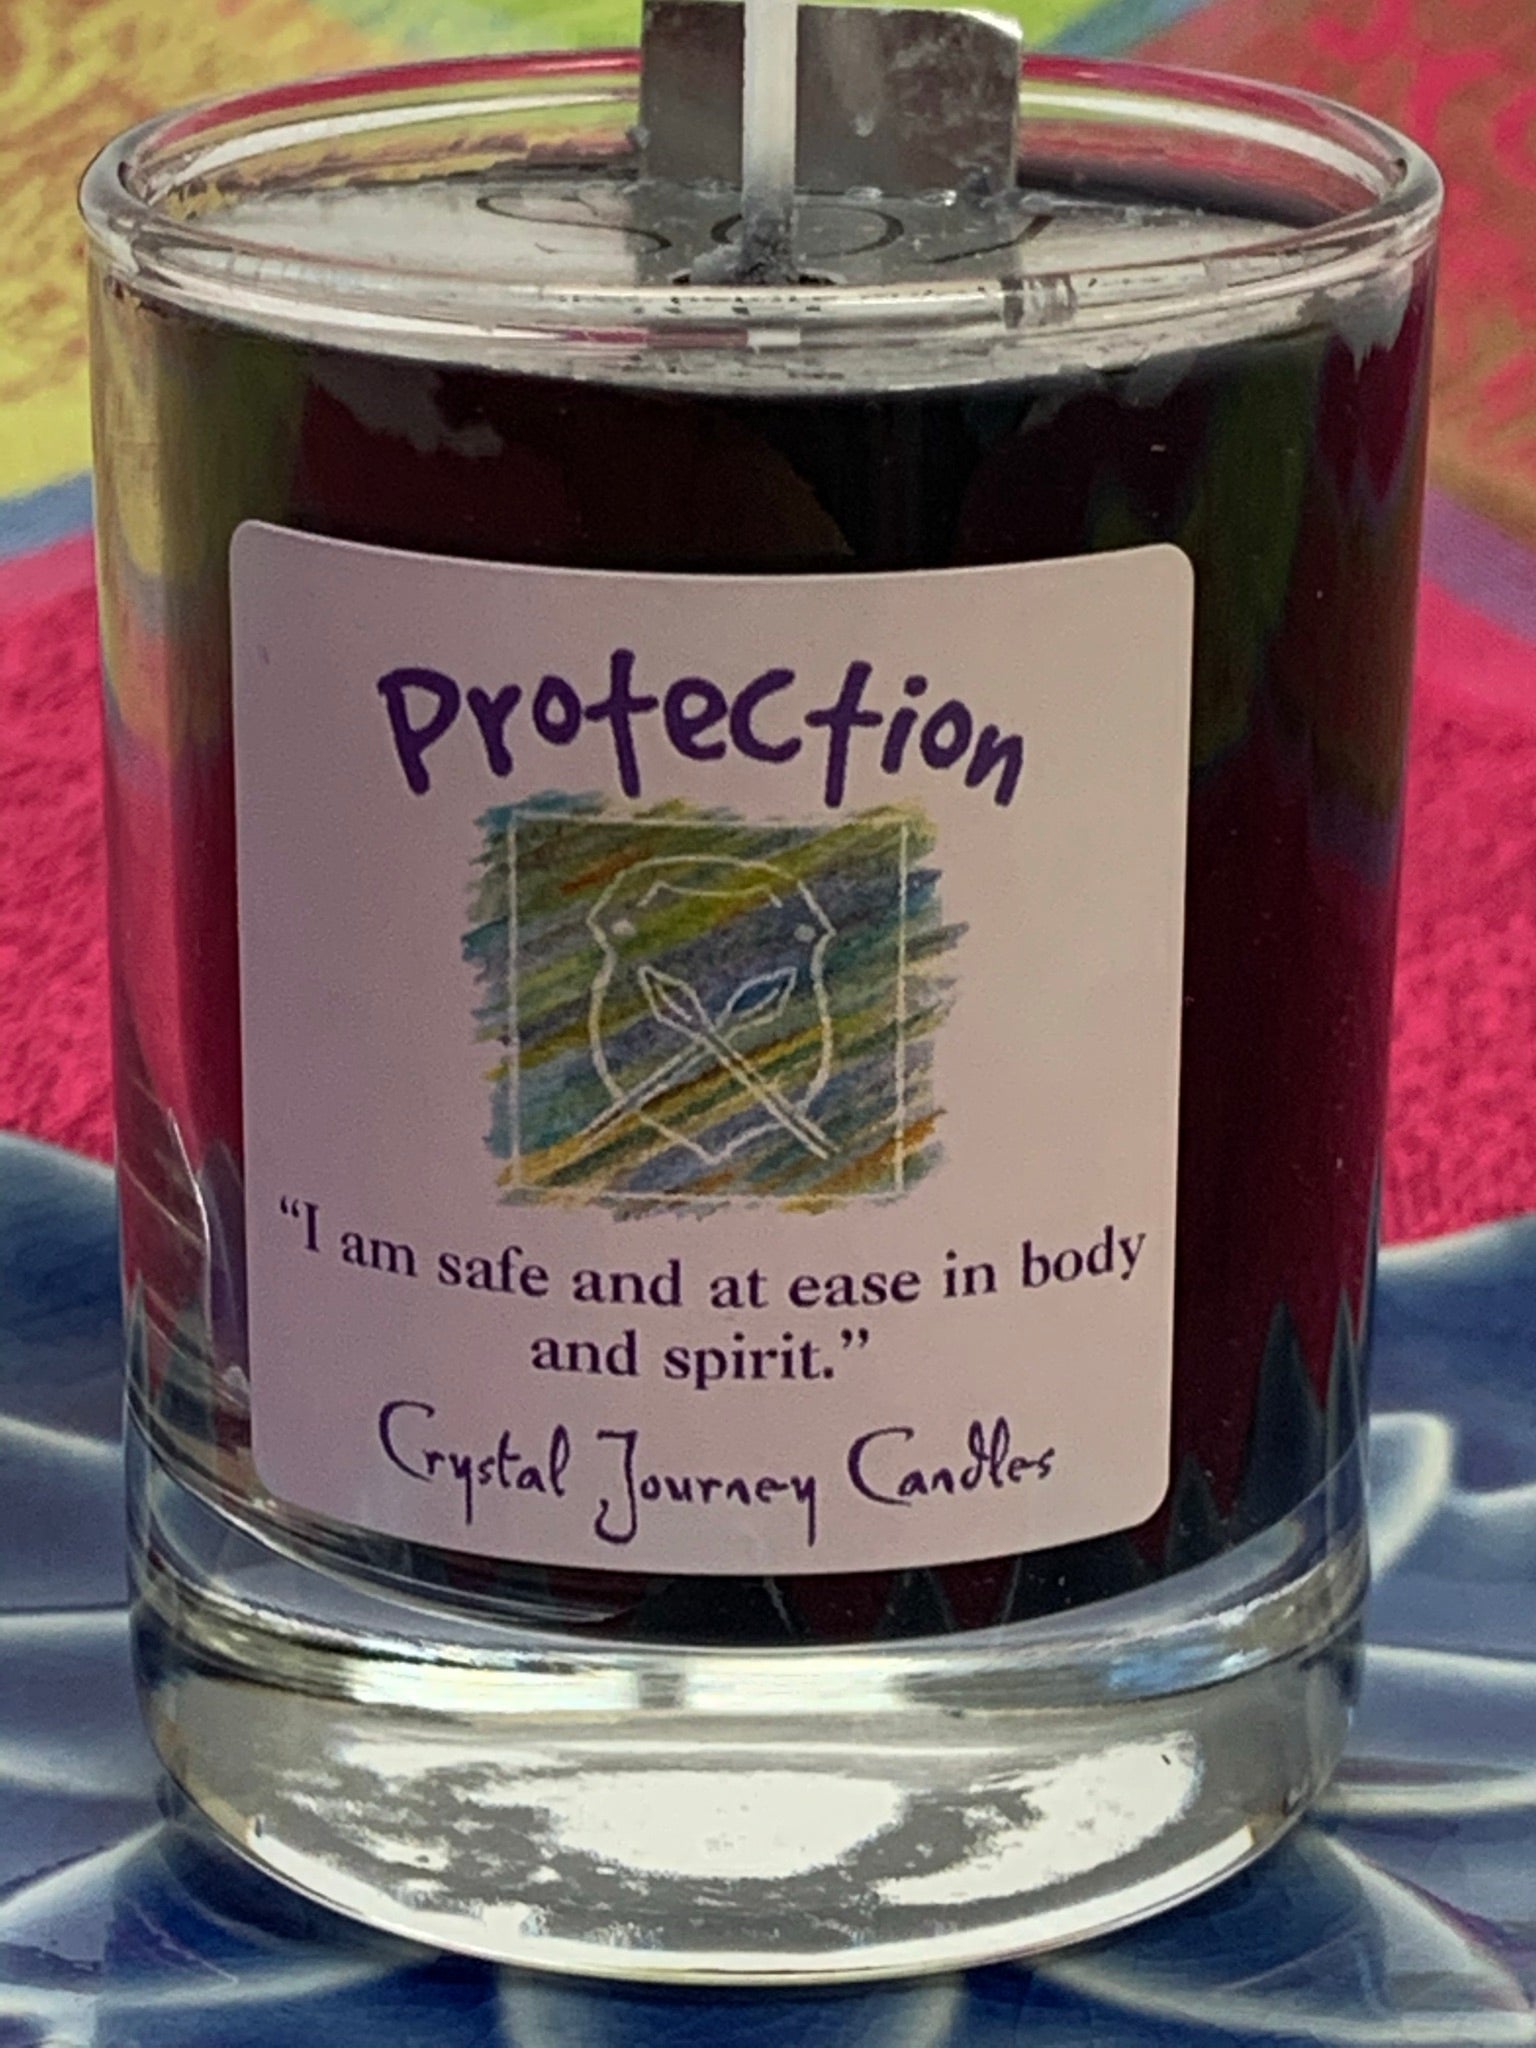 Close-up view of the handcrafted black votive candle a in glass holder. The wax is soy-based (no paraffin) and it is also vegan. Wicks are made with paper and cotton only. This candle is for "protection" and an associated affirmation is printed on the label for your use - "I am safe and at ease in body and spirit."